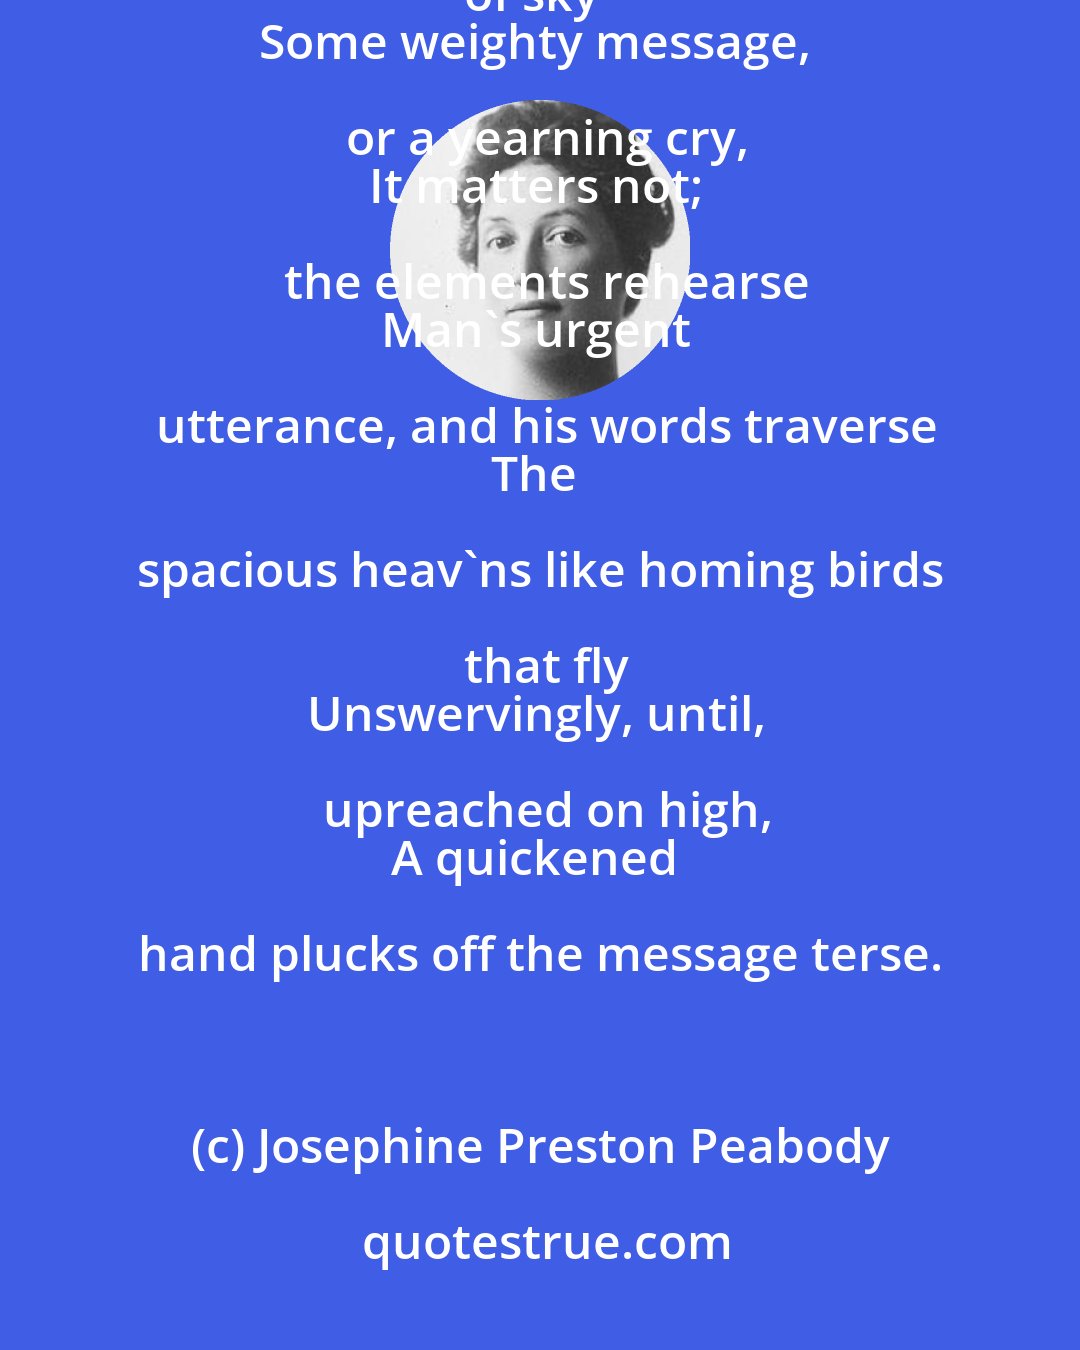 Josephine Preston Peabody: This is a marvel of the universe:
To fling a thought across a stretch of sky--
Some weighty message, or a yearning cry,
It matters not; the elements rehearse
Man's urgent utterance, and his words traverse
The spacious heav'ns like homing birds that fly
Unswervingly, until, upreached on high,
A quickened hand plucks off the message terse.